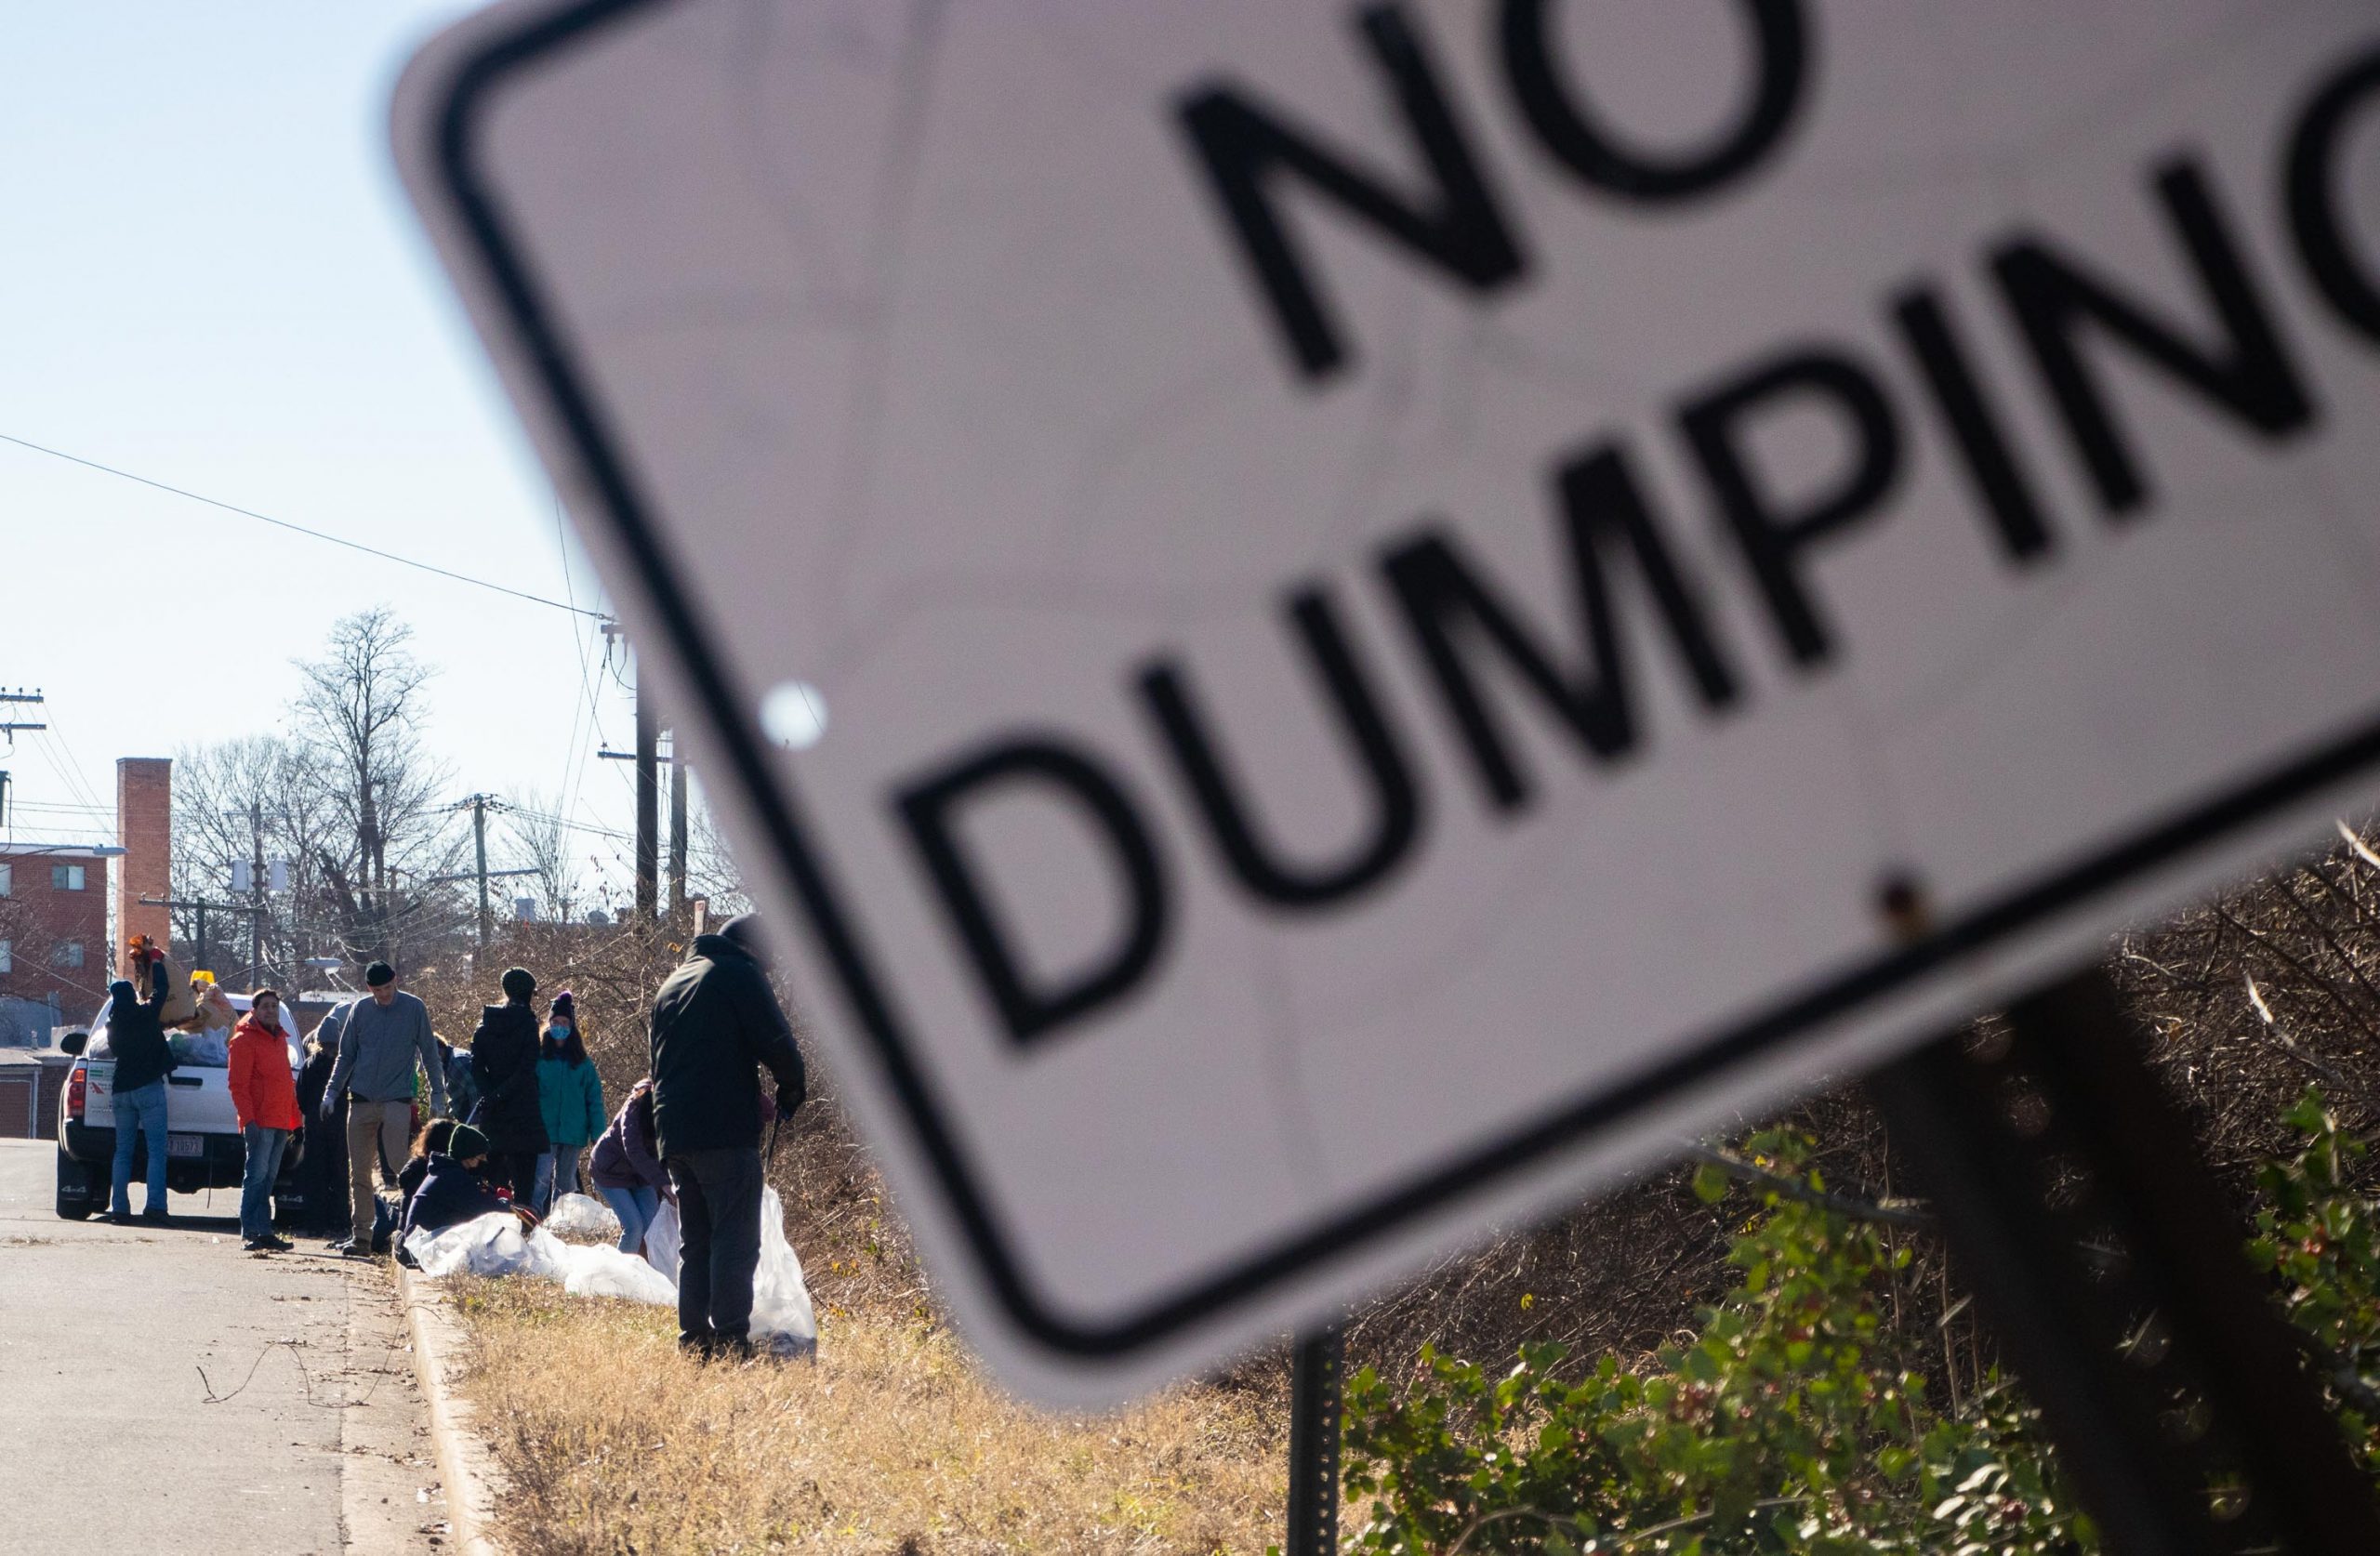 Volunteers search for trash alongside the street Saturday during the Martin Luther King day of service cleanup on Saturday. Pope Branch Park is sometimes used as an illegal dumping site according to Trey Sherard of Anacostia RiverKeeper. (Isabel Miller | Medill News Service)